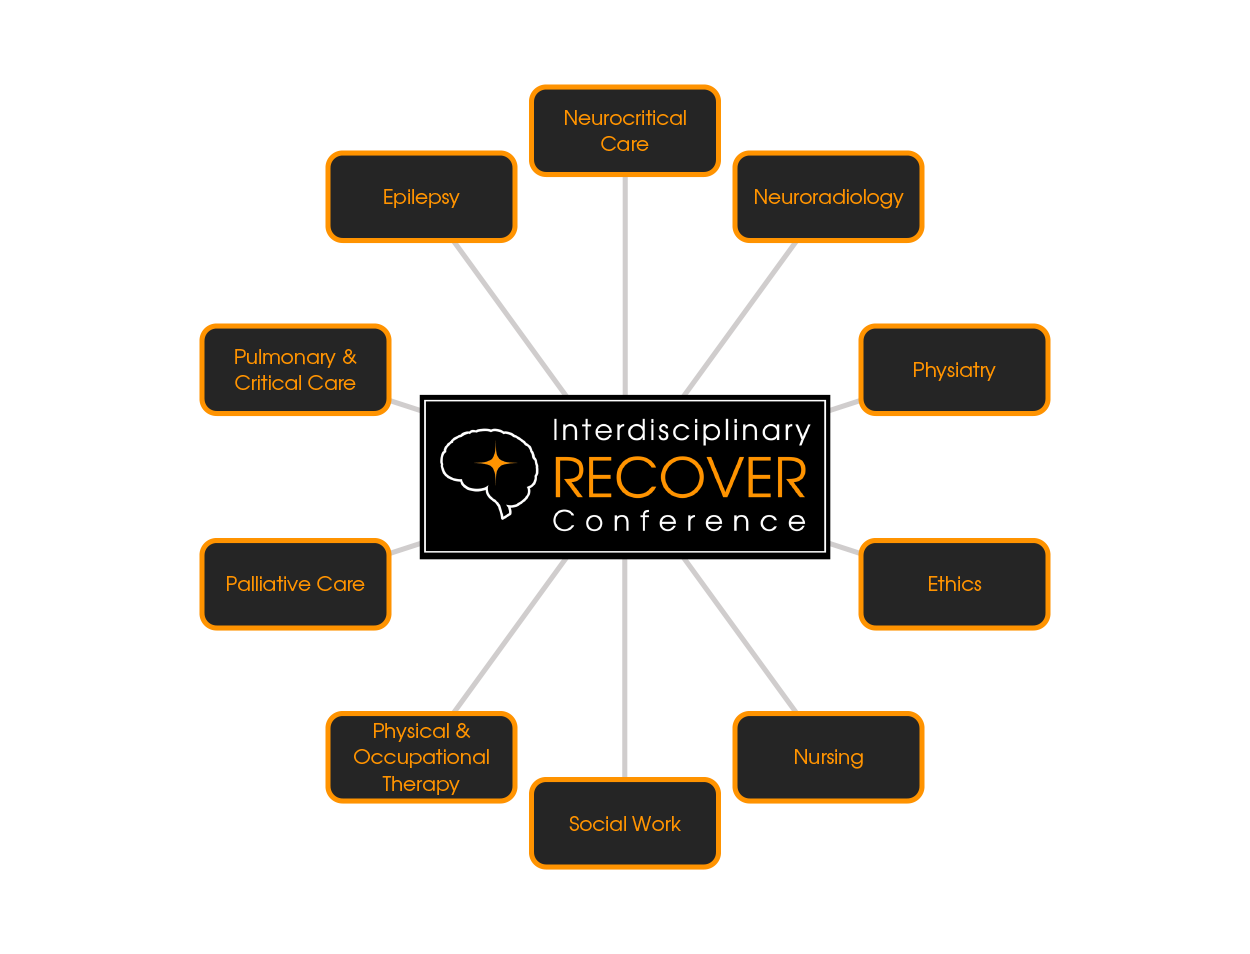 The RECOVER Program incorporates input from numerous disciplines and specialties such as epilepsy, neurocritical care, neuroradiology, physiatry, ethics, nursing, social work, physical & occupational therapy, palliative care, and pulmonary & critical care.